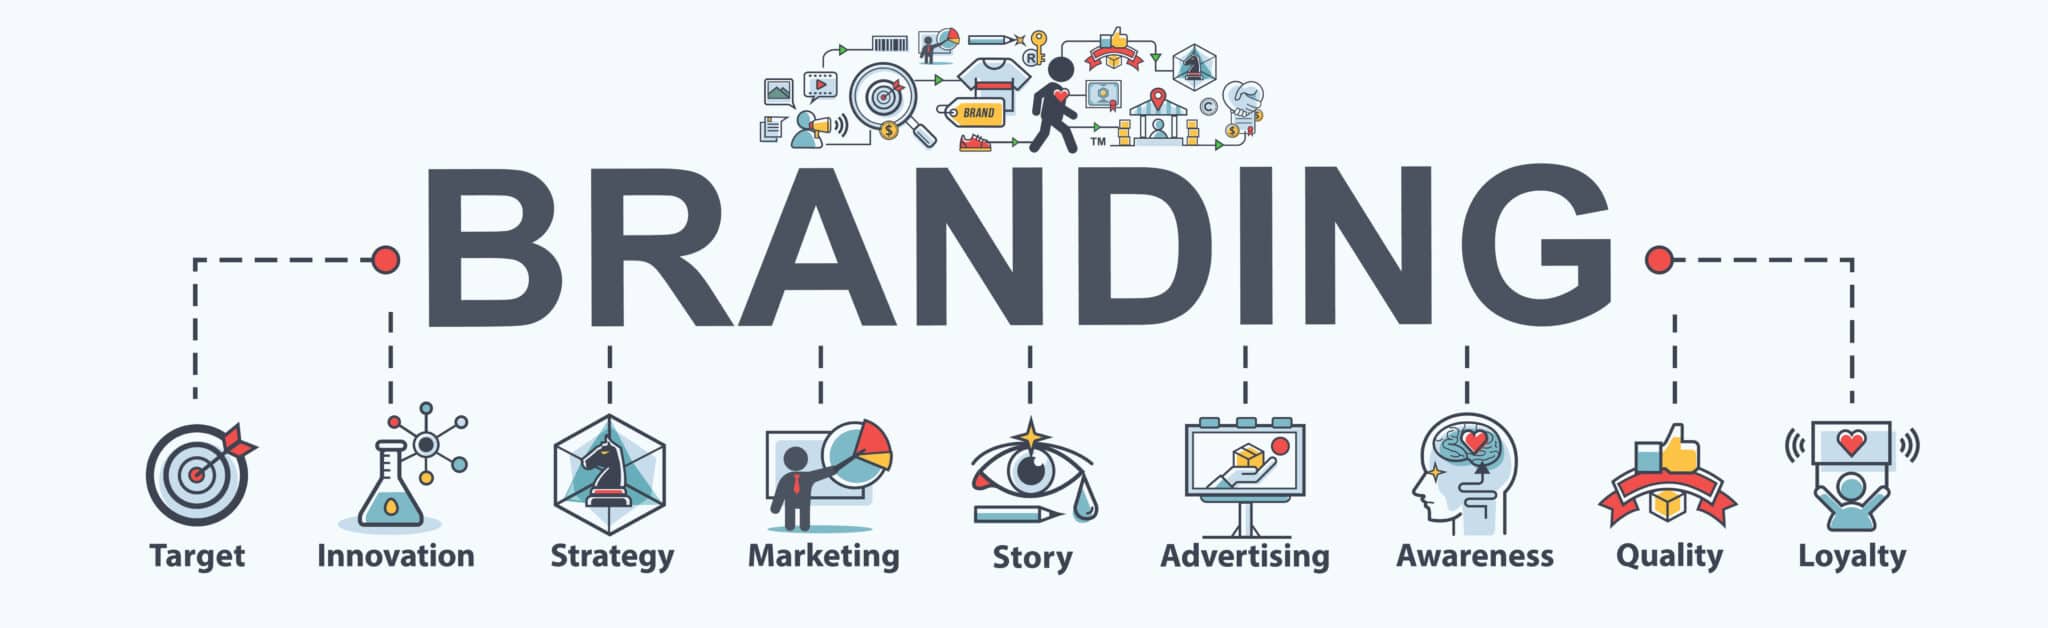 brand image examples